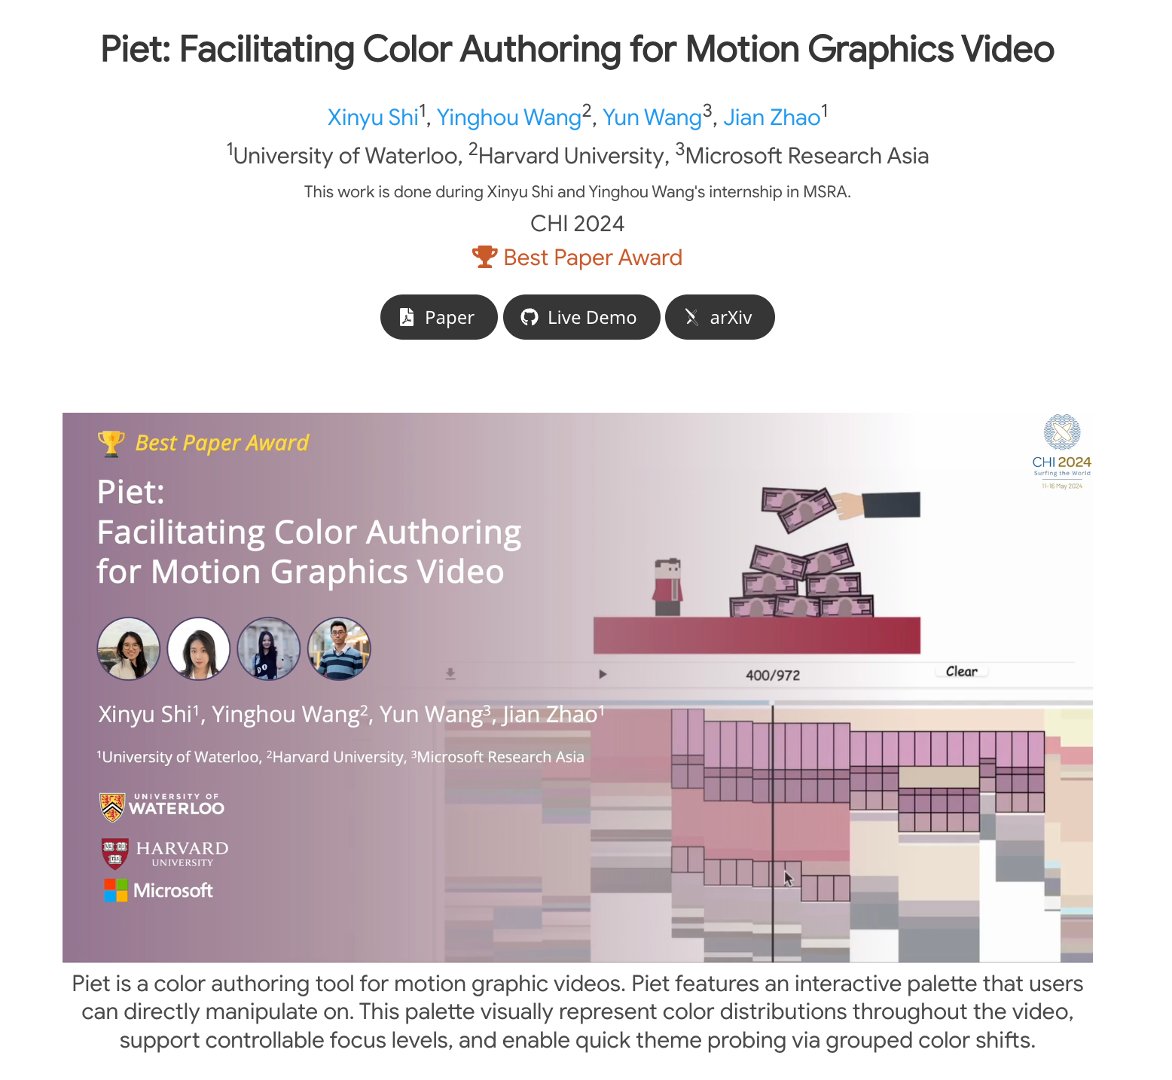 Dive into the art of colors in motion graphic videos with our award-winning tool in #chi2024, Piet! 🏆 Experience our live demo and see how easy and fun tweaking video colors can be! Check it out now: xinyu-shi.github.io/uploads/Piet_p…